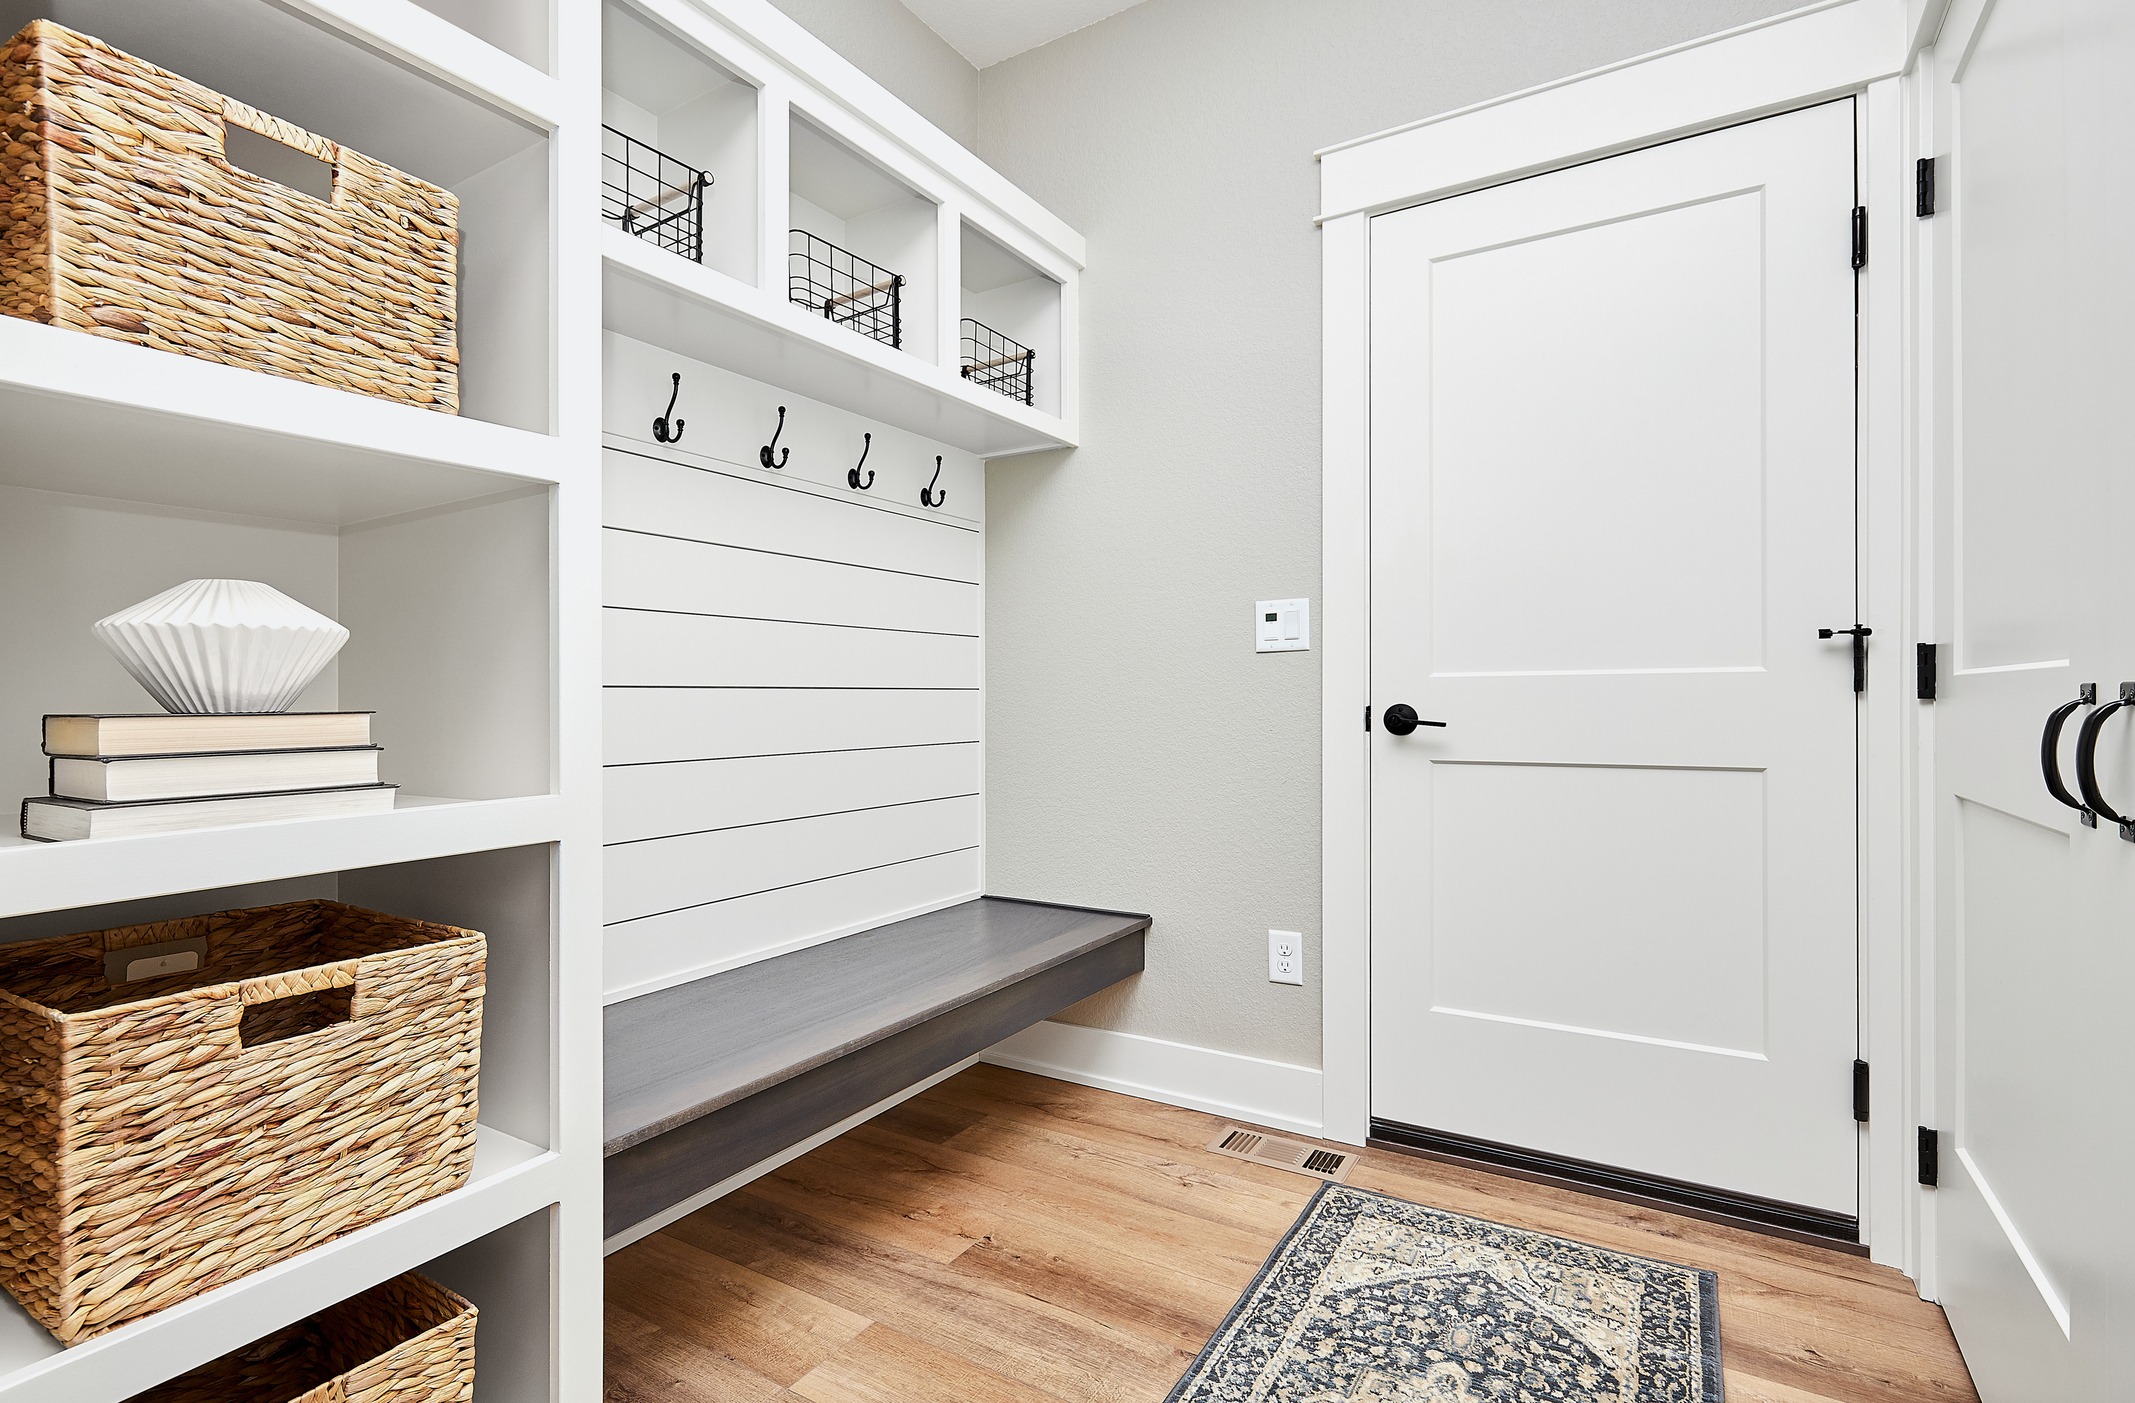 A modern, clean mudroom featuring white built-in shelves, a bench with hooks above, a closed white door, woven baskets, books, and a decorative rug.